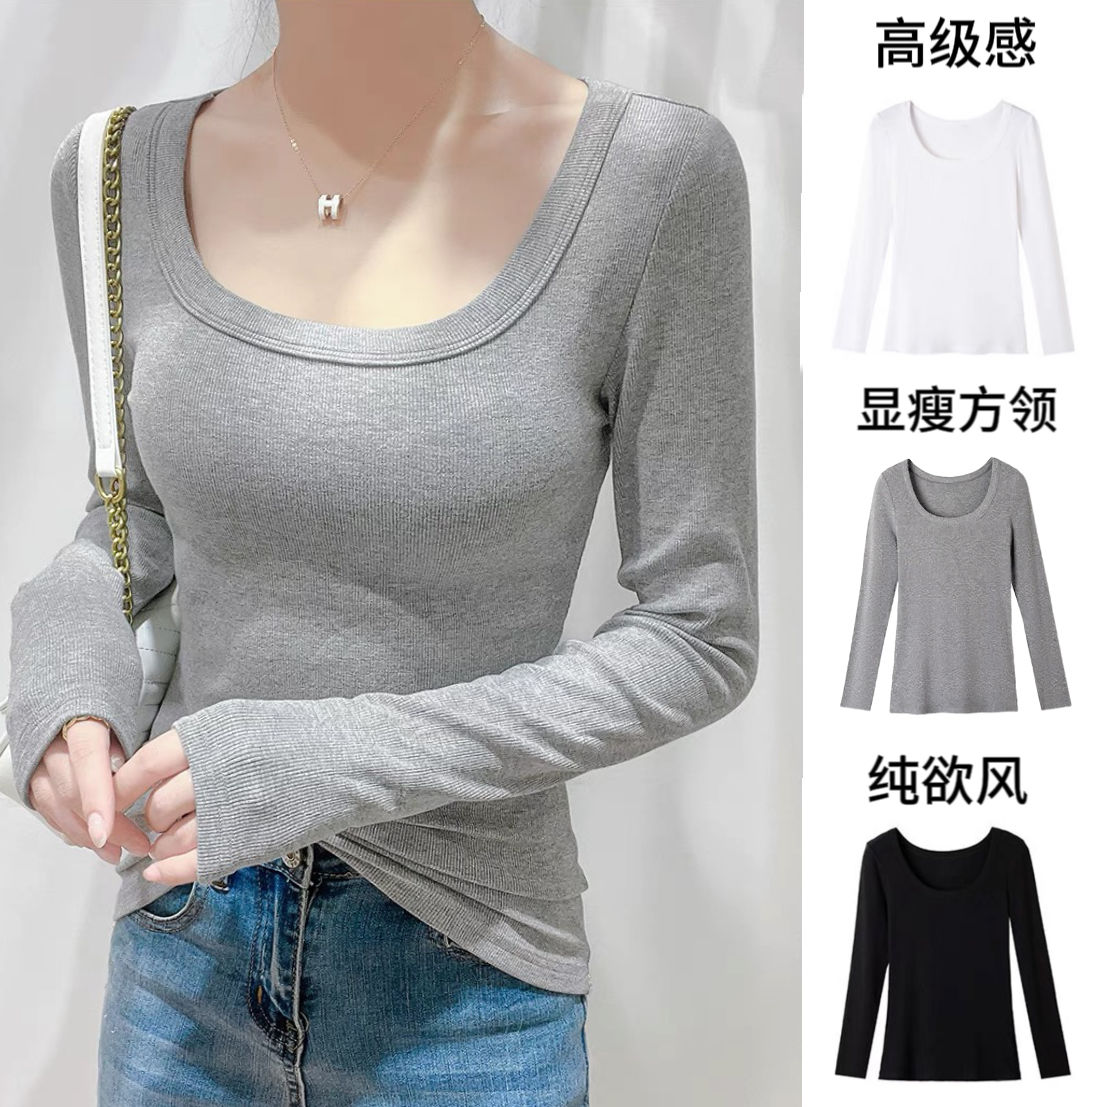 long sleeve t-shirt thread square collar high class elegant socialite bottoming shirt female spring and autumn slim fit pure color slimming inner wear blouse